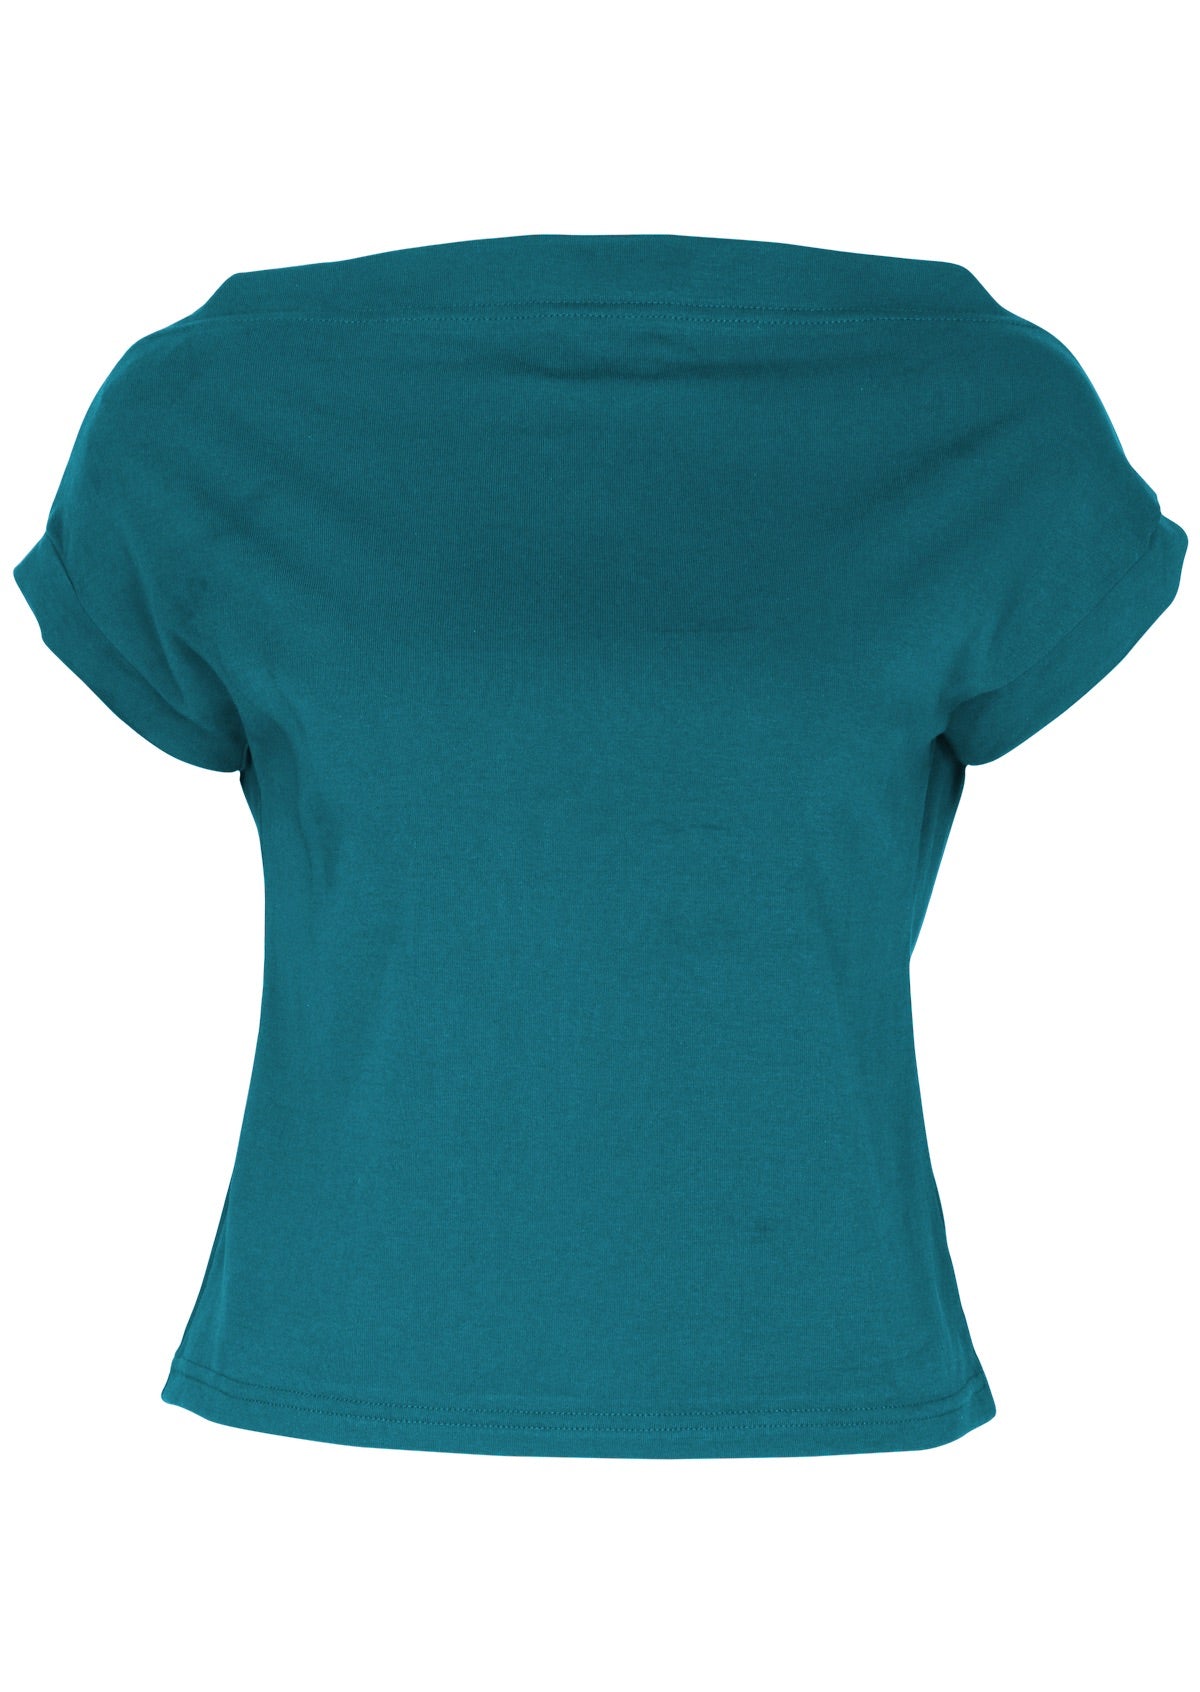 Front view of a women's wide neck mod teal stretch rayon boat neck top